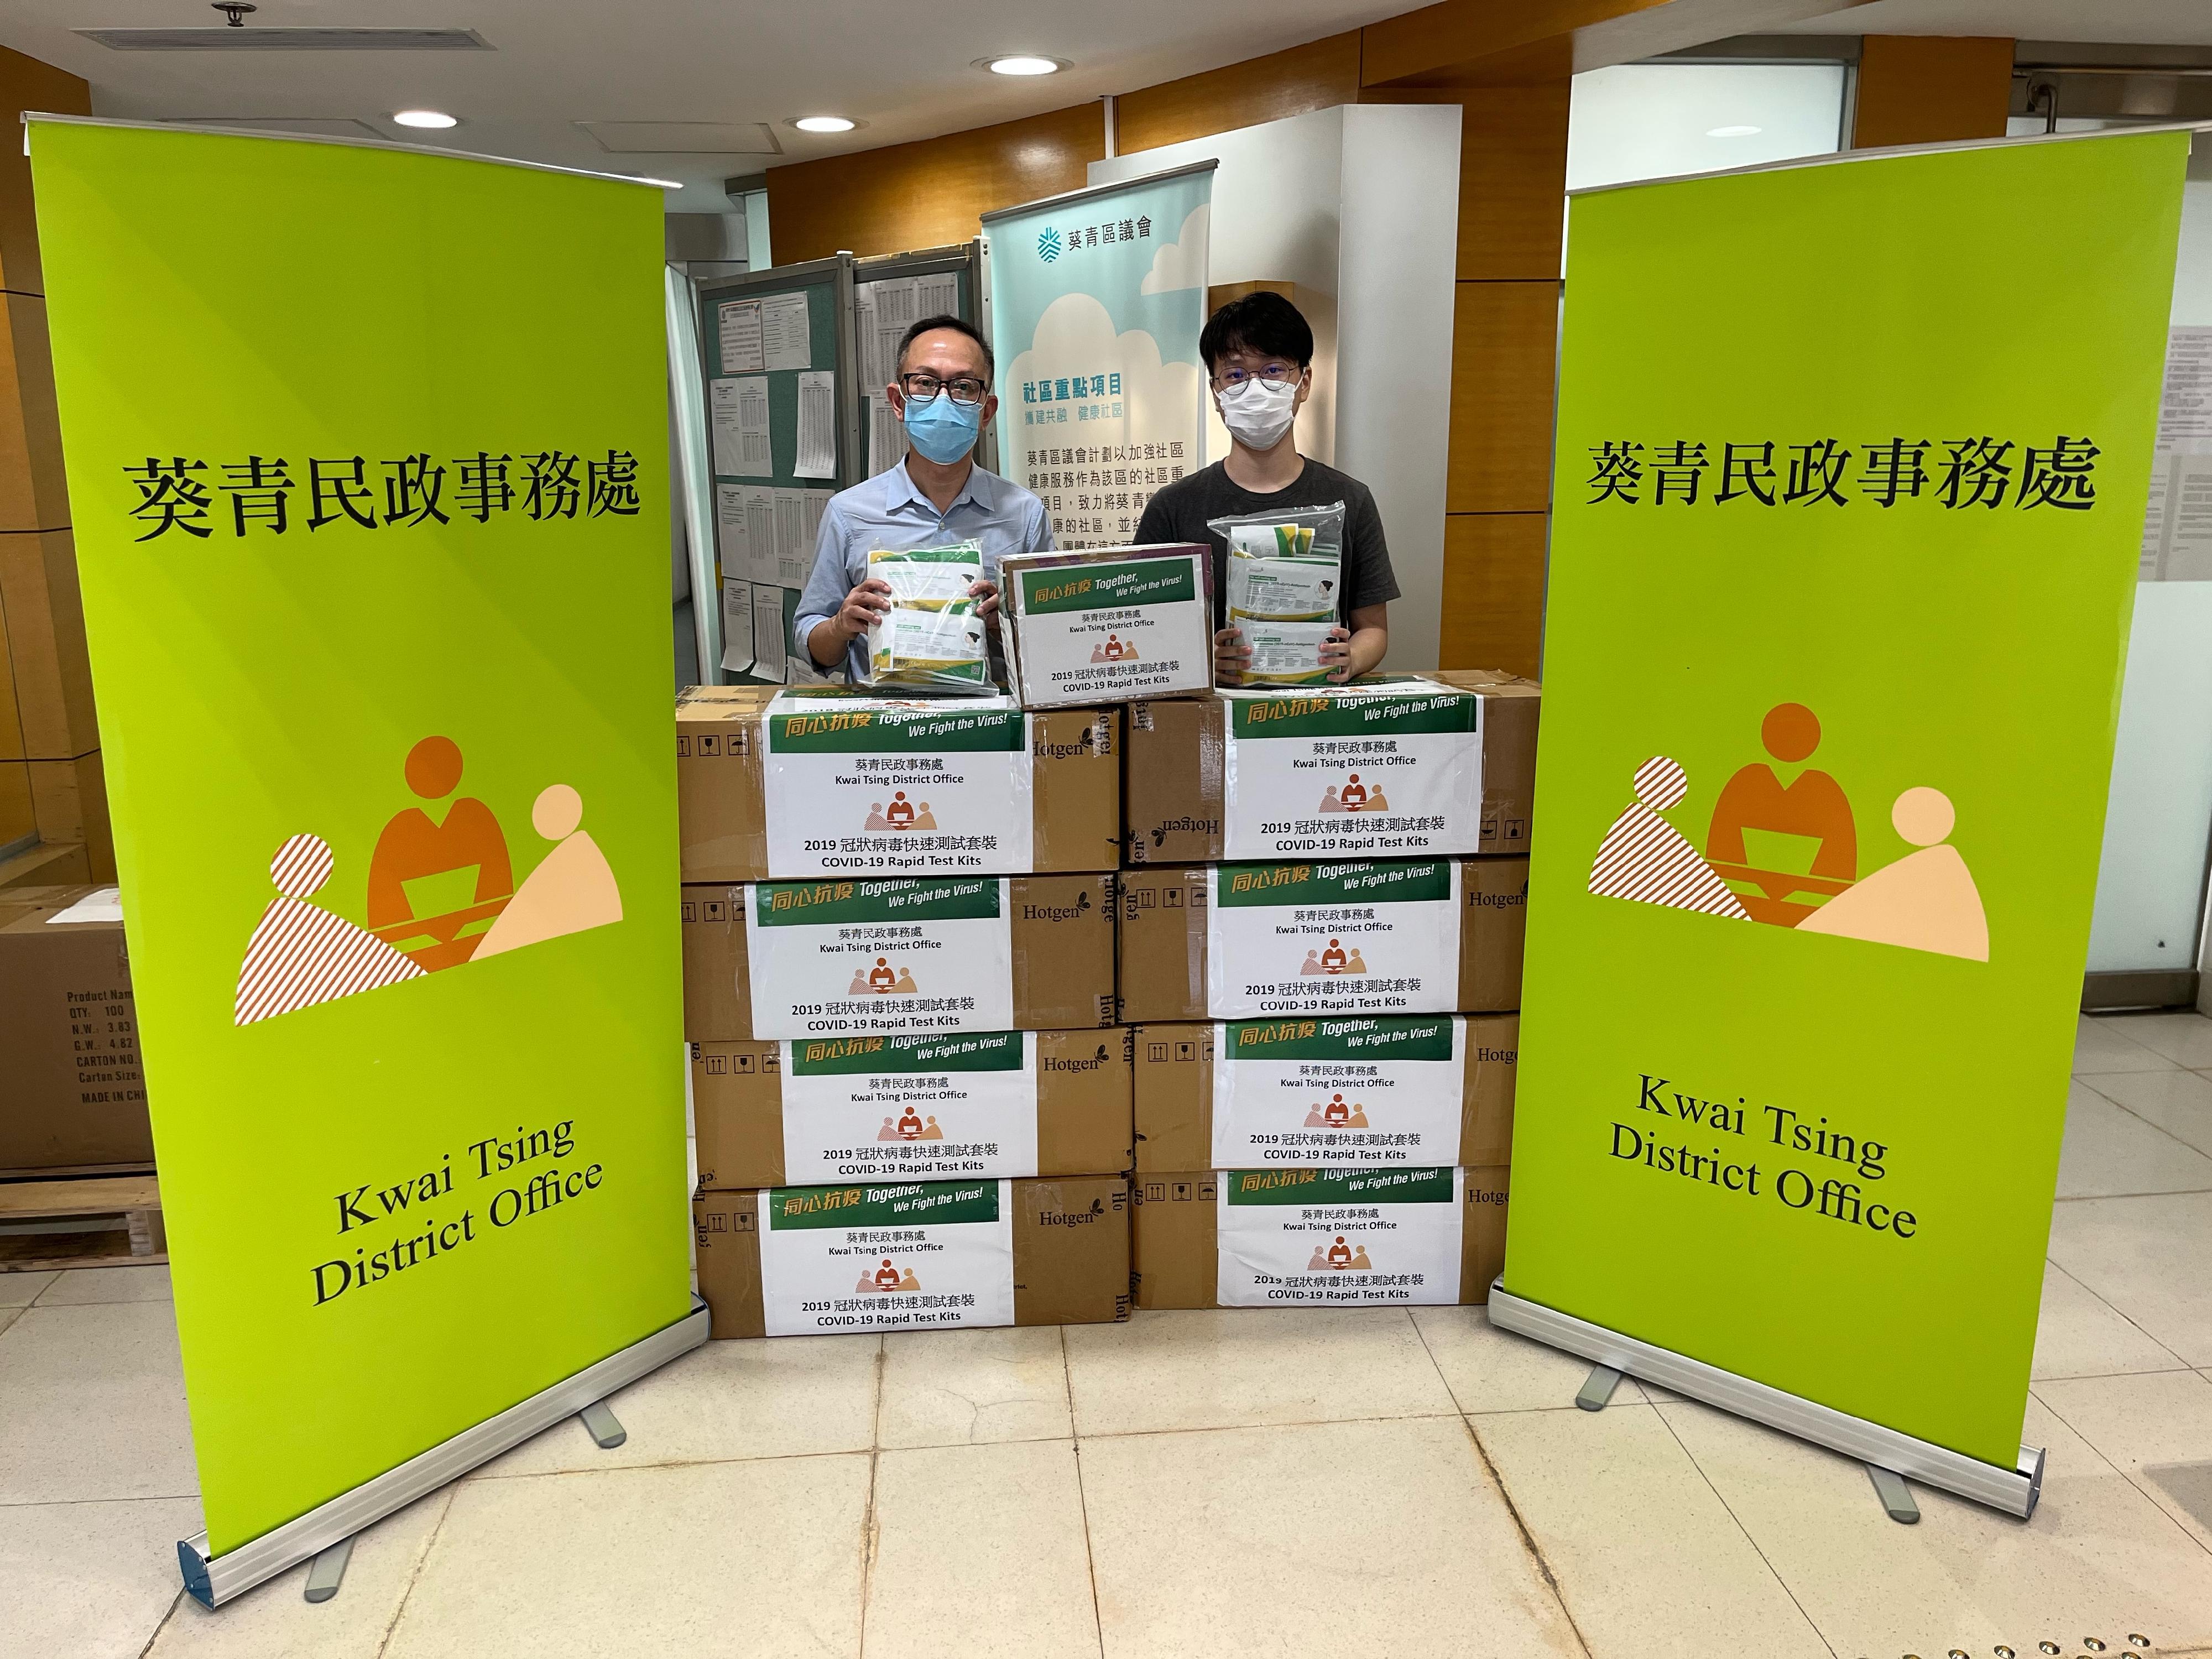 The Kwai Tsing District Office today (July 14) distributed rapid test kits to households, cleansing workers and property management staff living and working in Shui King Building for voluntary testing through the property management company.
